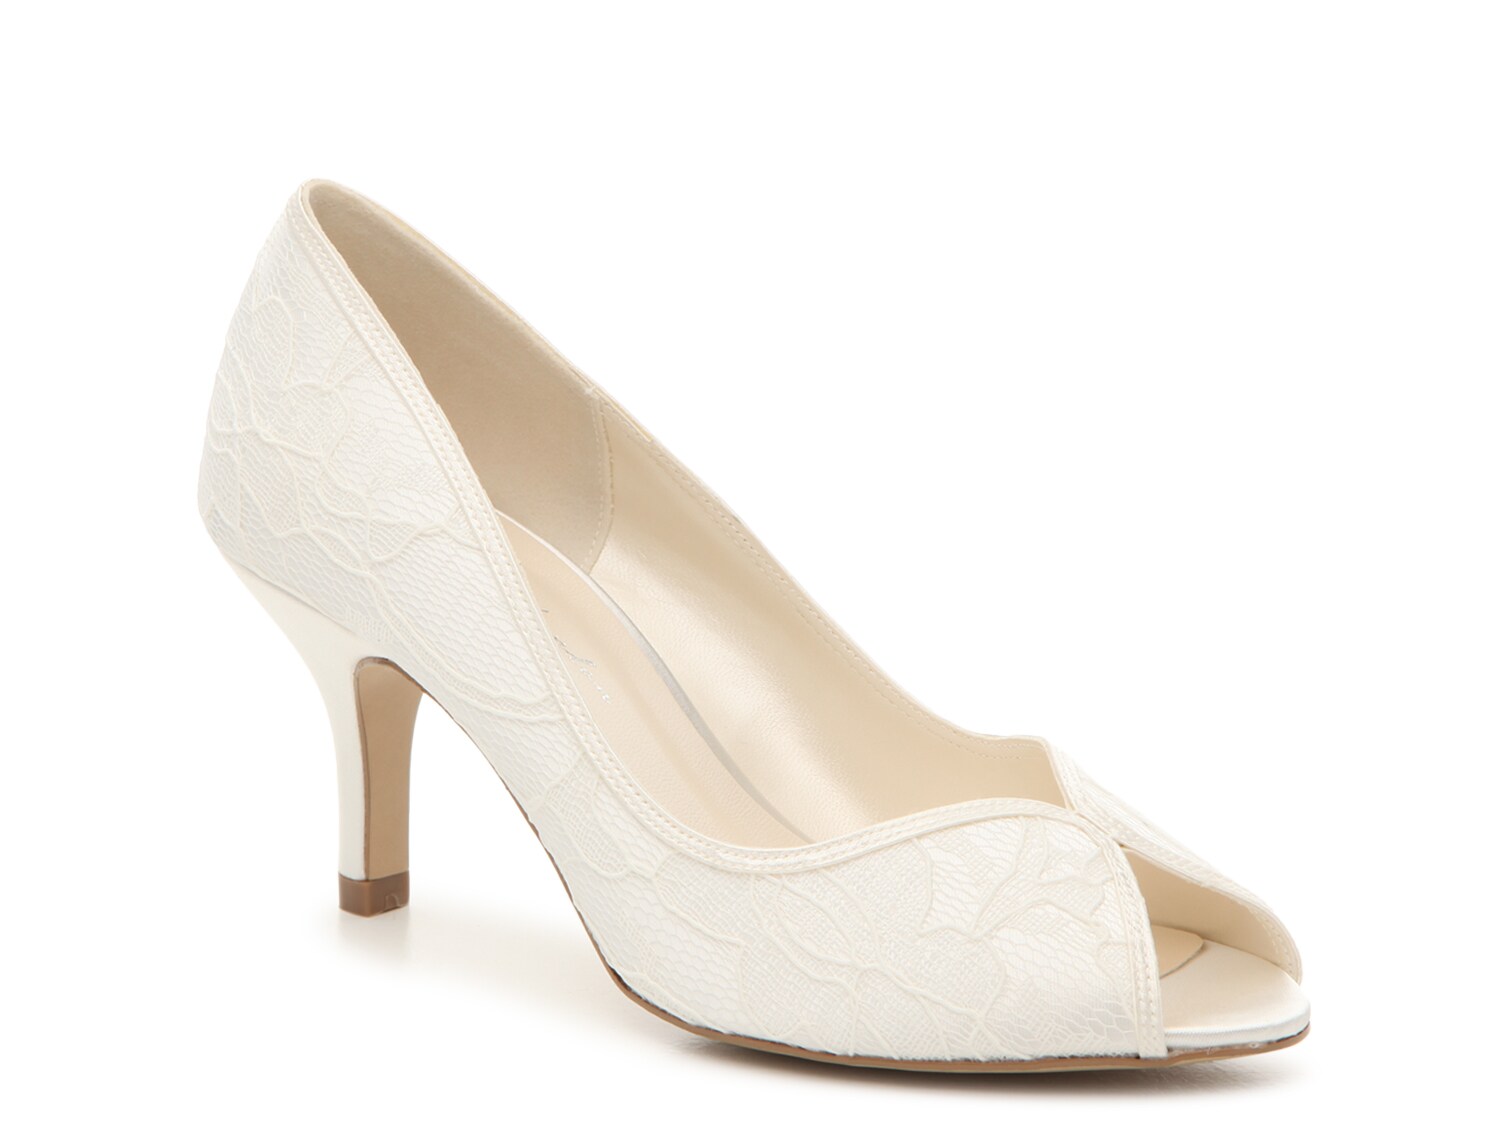 Paradox London Christabel Pump - Free Shipping | DSW